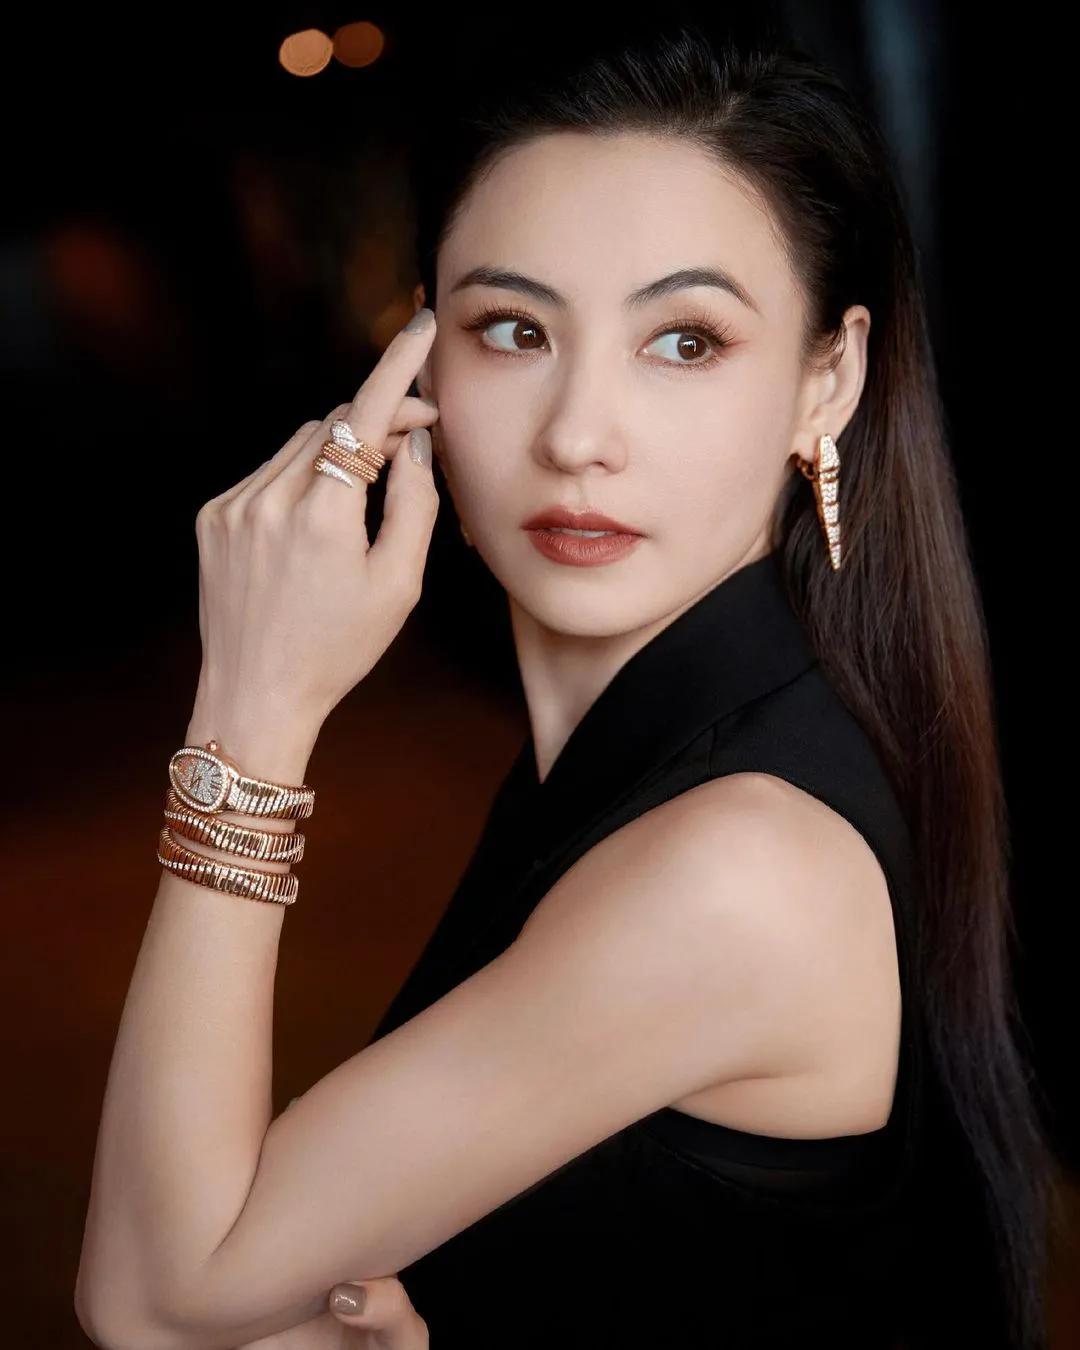 Cecilia Cheung And Zhao Lusi Attend The Bulgari Event In The Same Frame Each Has Its Own Merits 8582